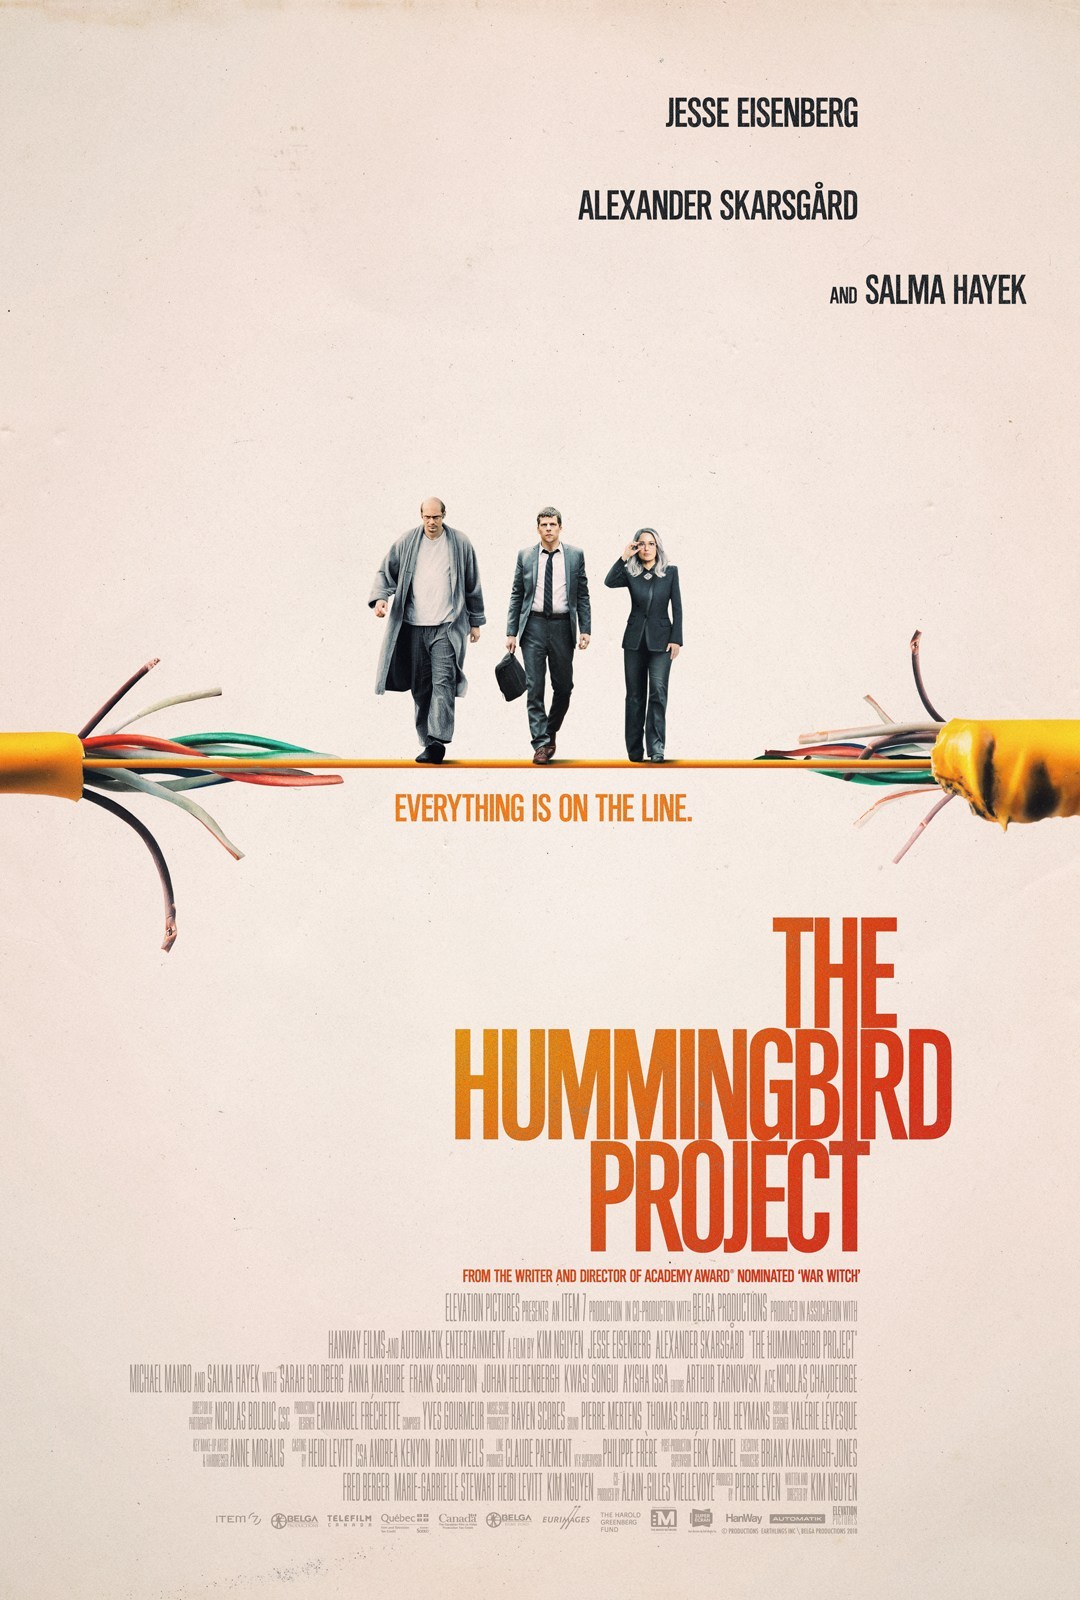 CONTEST: Win Passes to see an Advance Screening of The Hummingbird Project